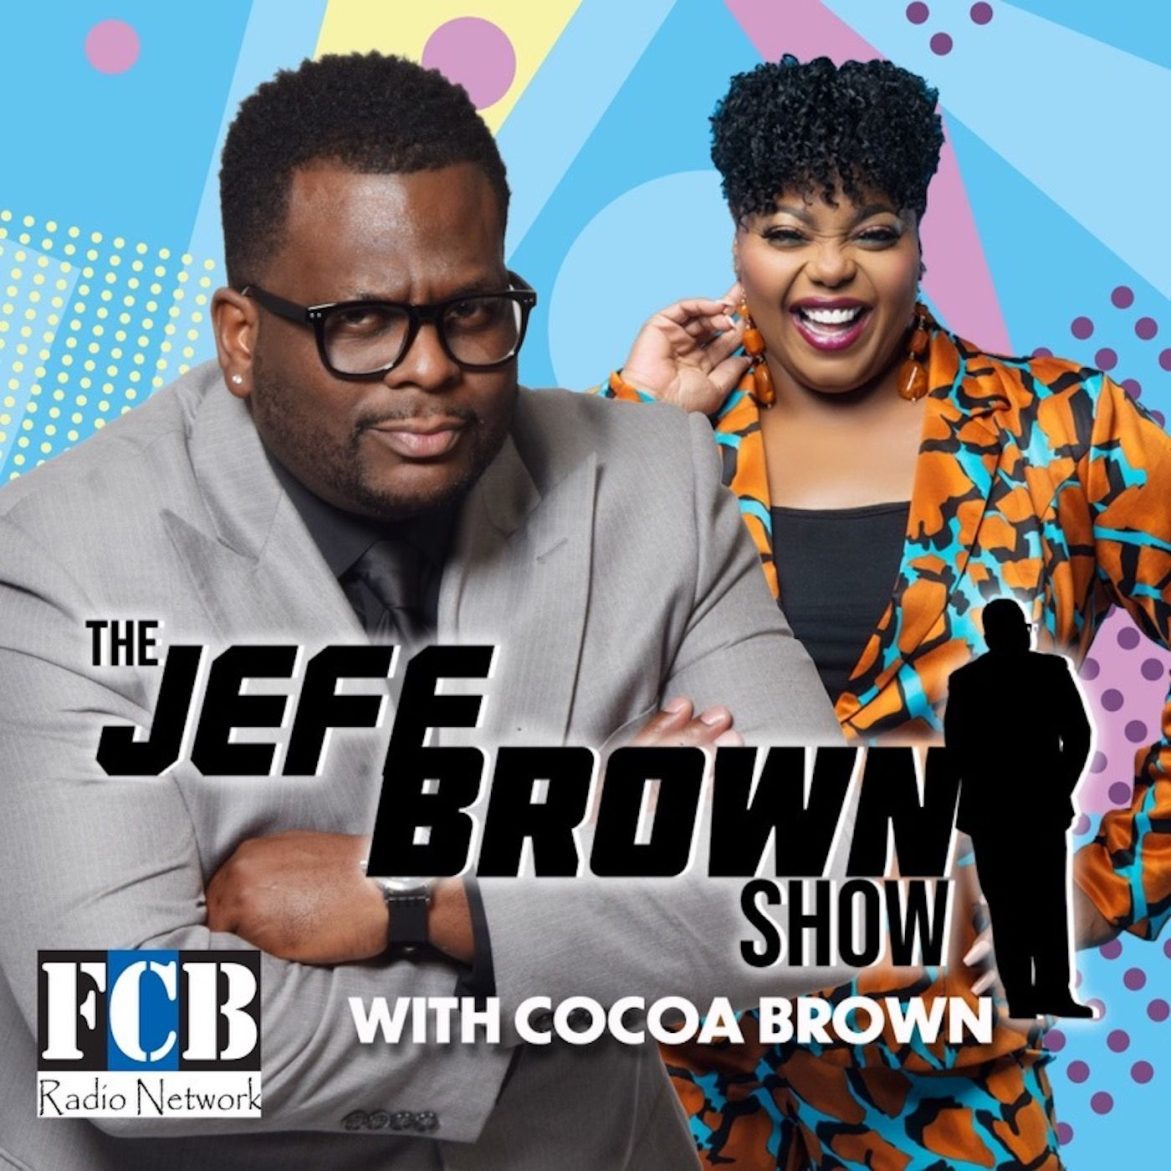 Black Podcasting - Ep. 208 - Hot topics with Jeff and Cocoa